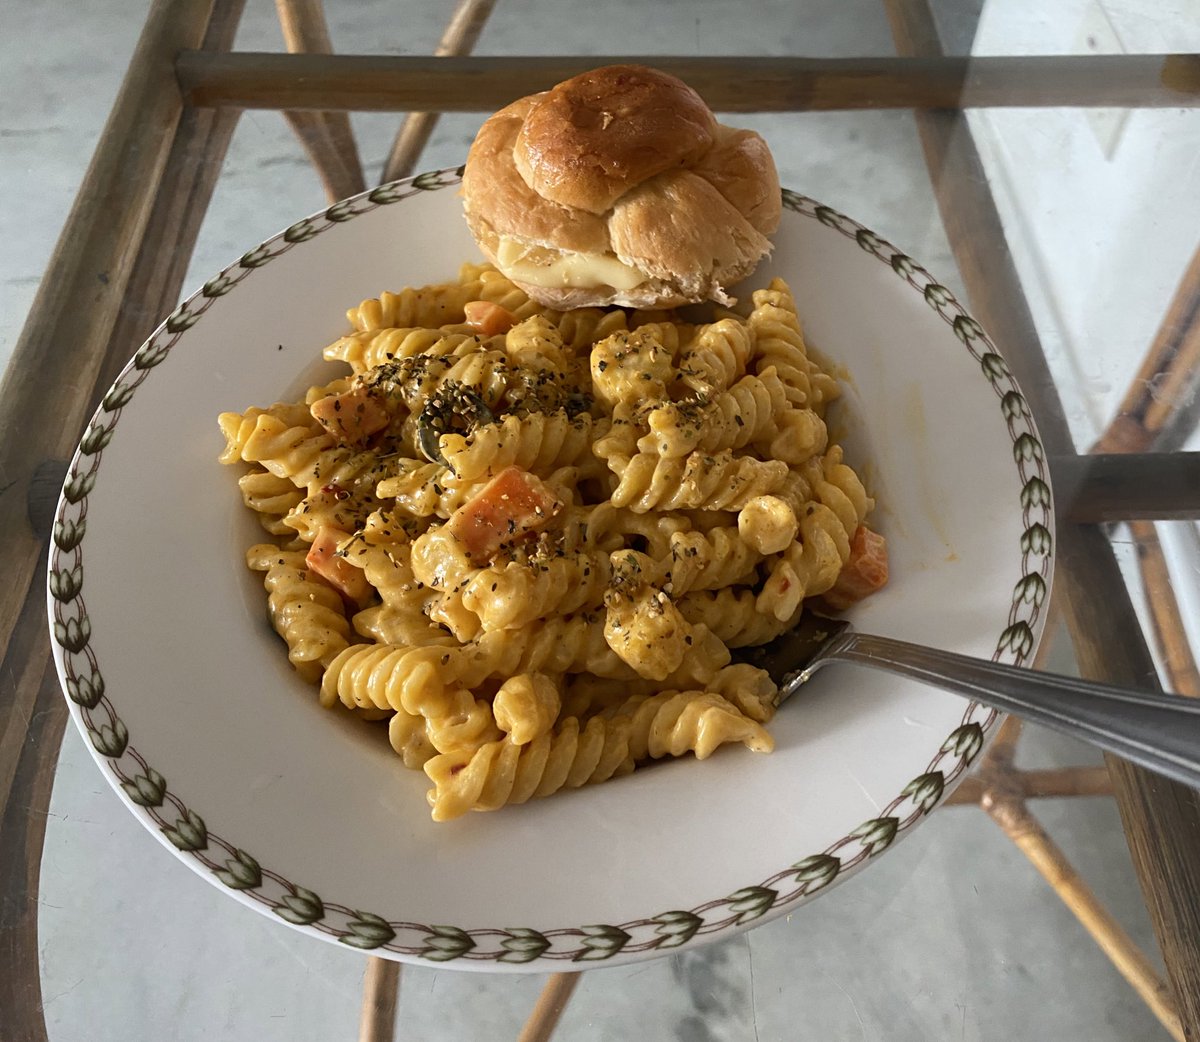 Rahul Ravindran On Twitter Combination Of White And Cheese Sauce Spirali With Toasted Dinner Rolls Loaded With Emmental Cheese My Own Experimental Recipe And All What The Photo Doesn T Tell You Though,Box Turtle Outdoor Habitat Ideas